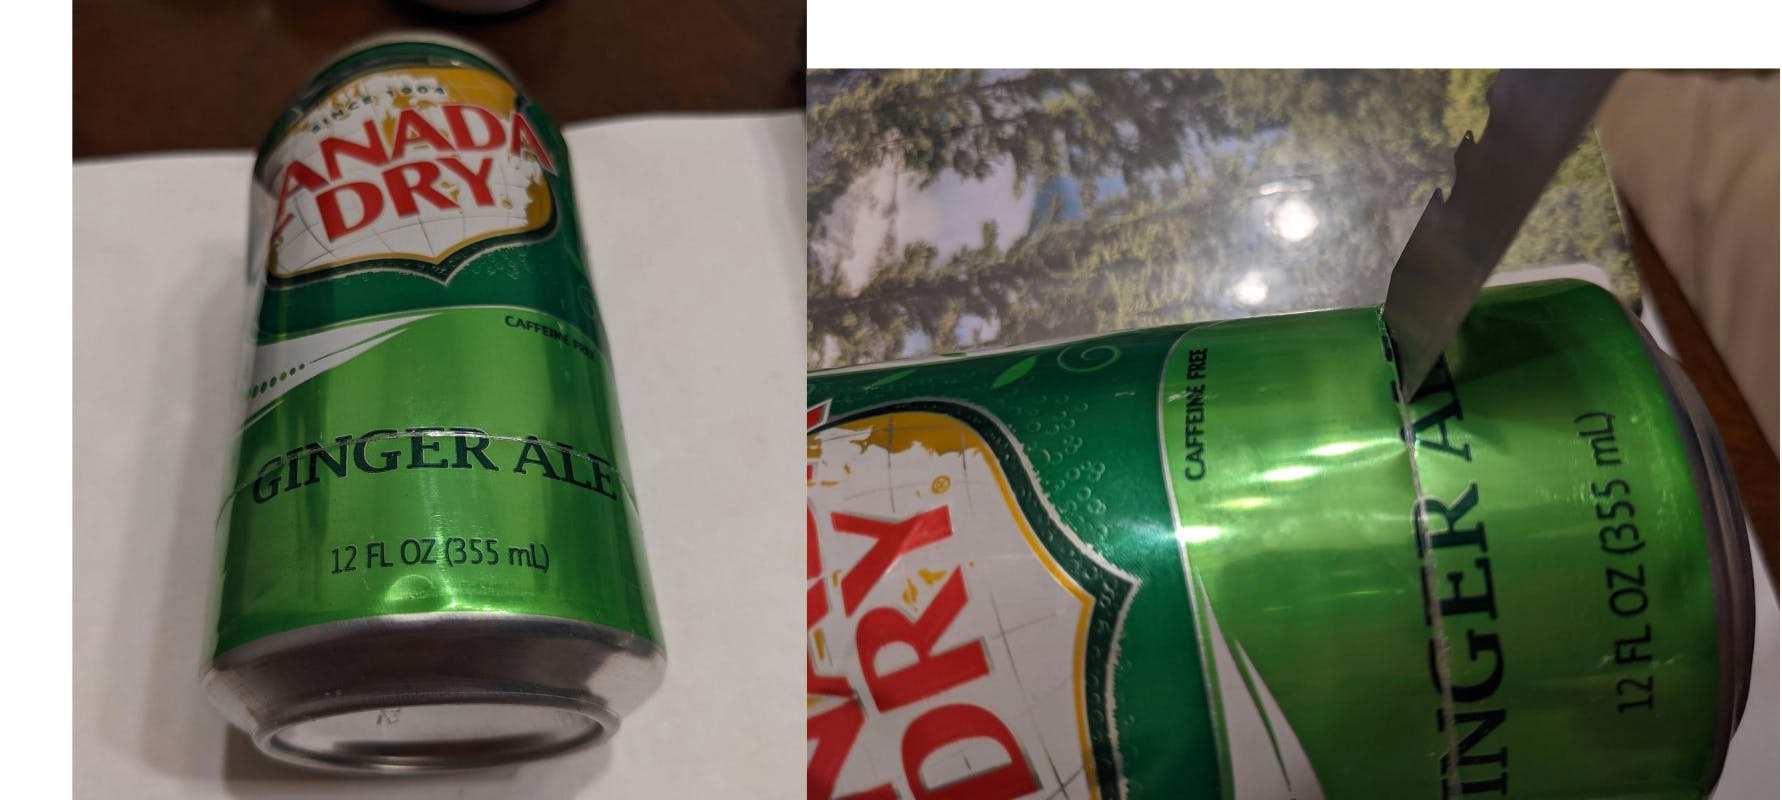 Two photos of a Canada Dry can. On the left is the can with a scoring around the middle, and on the right is a blade cutting the can. 